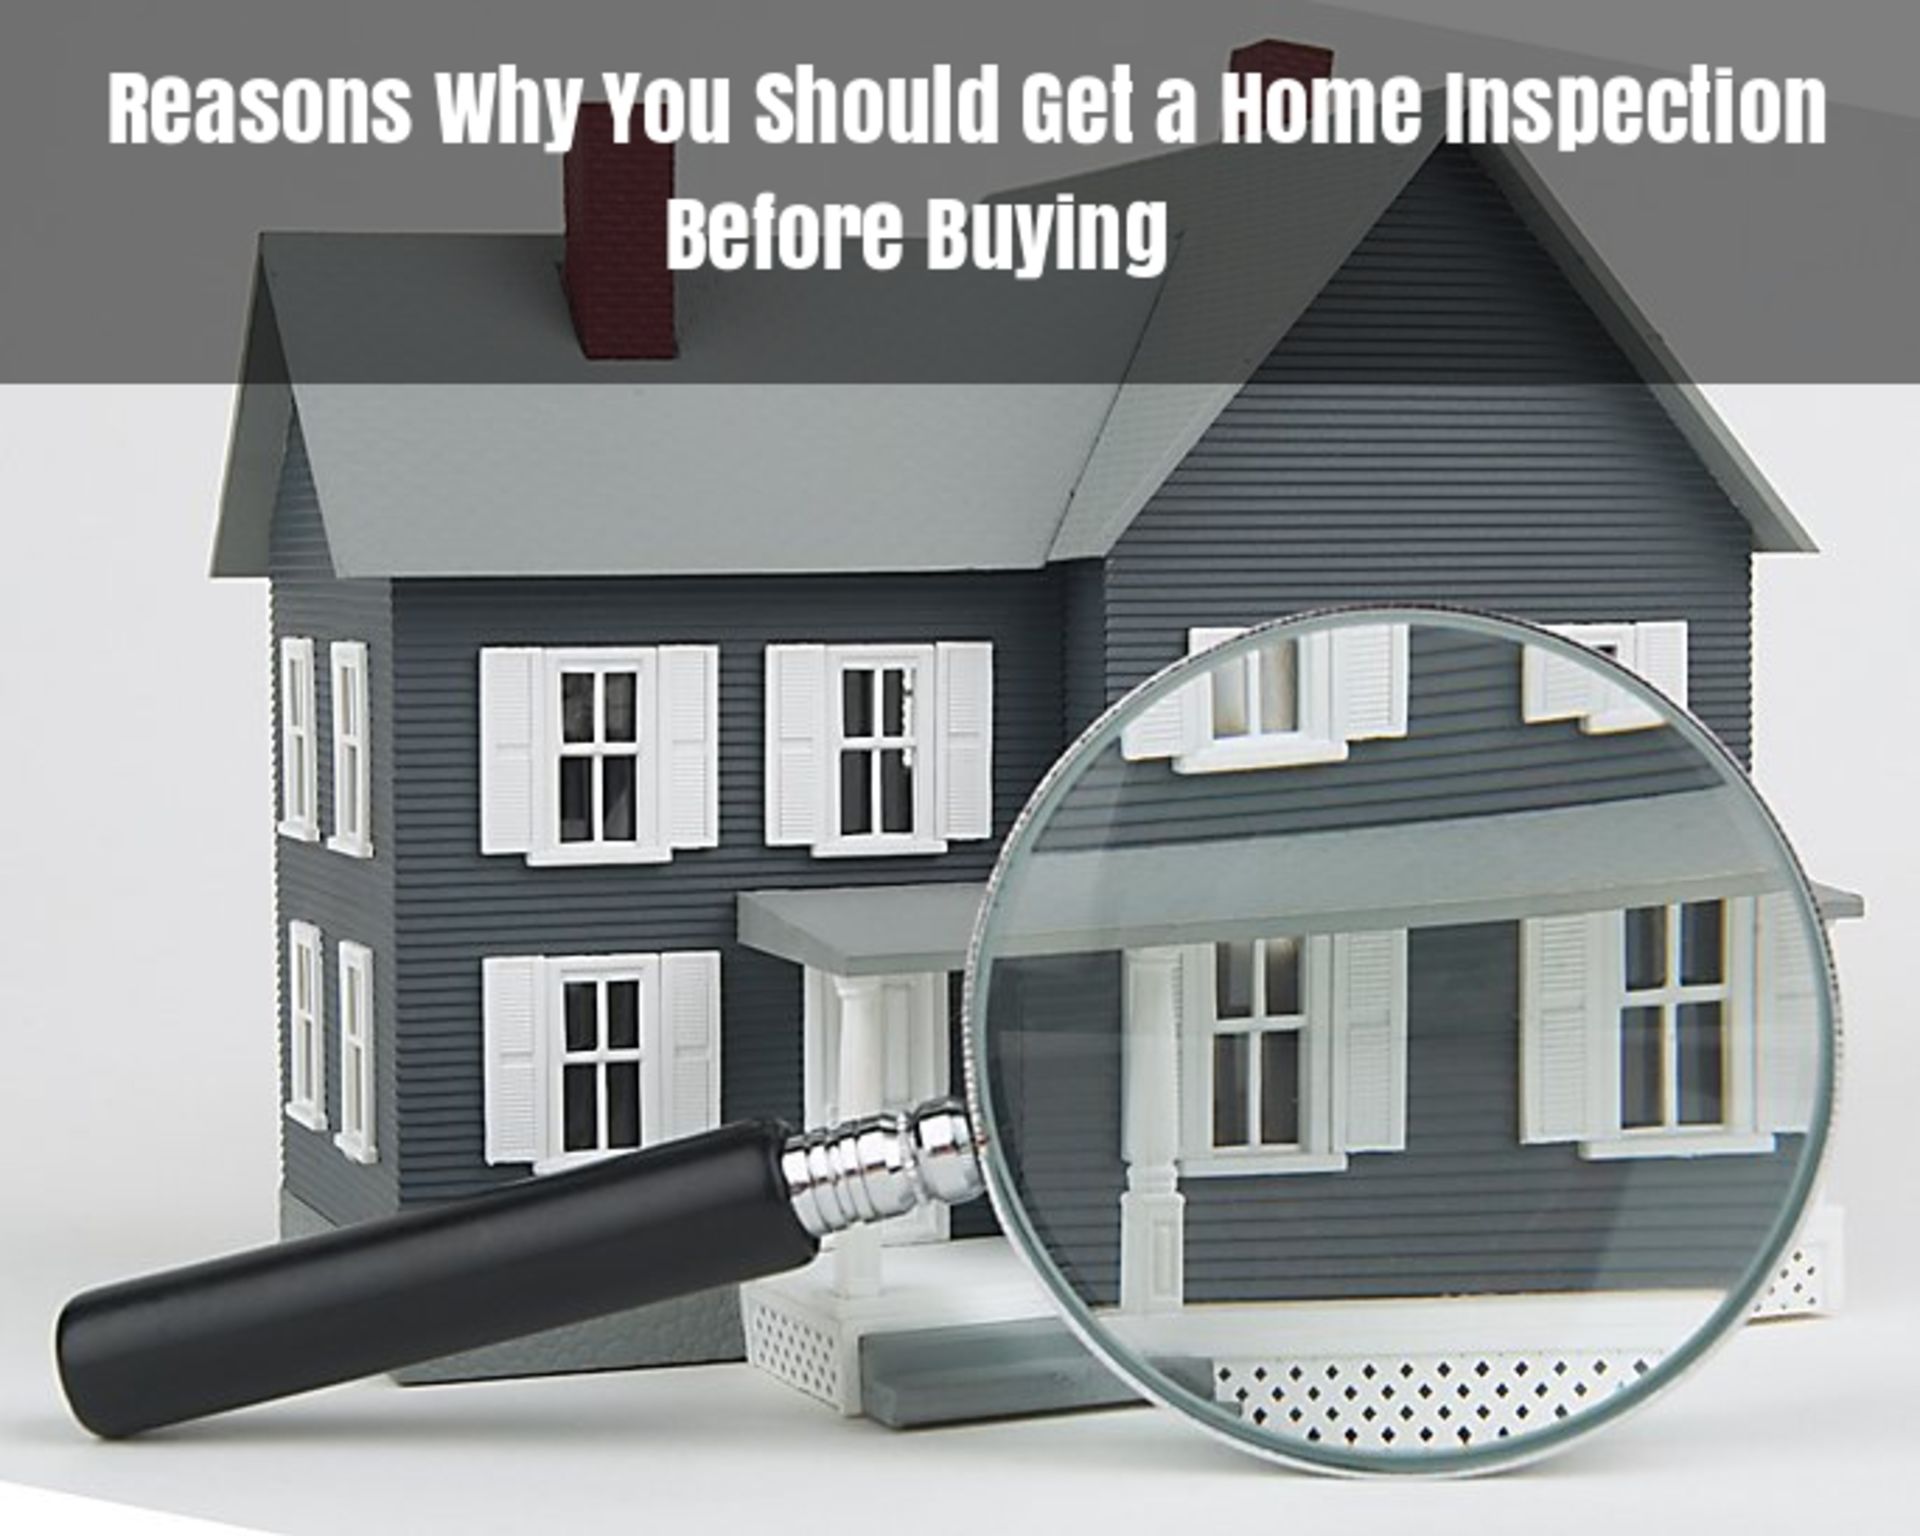 Home Inspection: What's Included And Not? in Rivervale Australia 2022 thumbnail